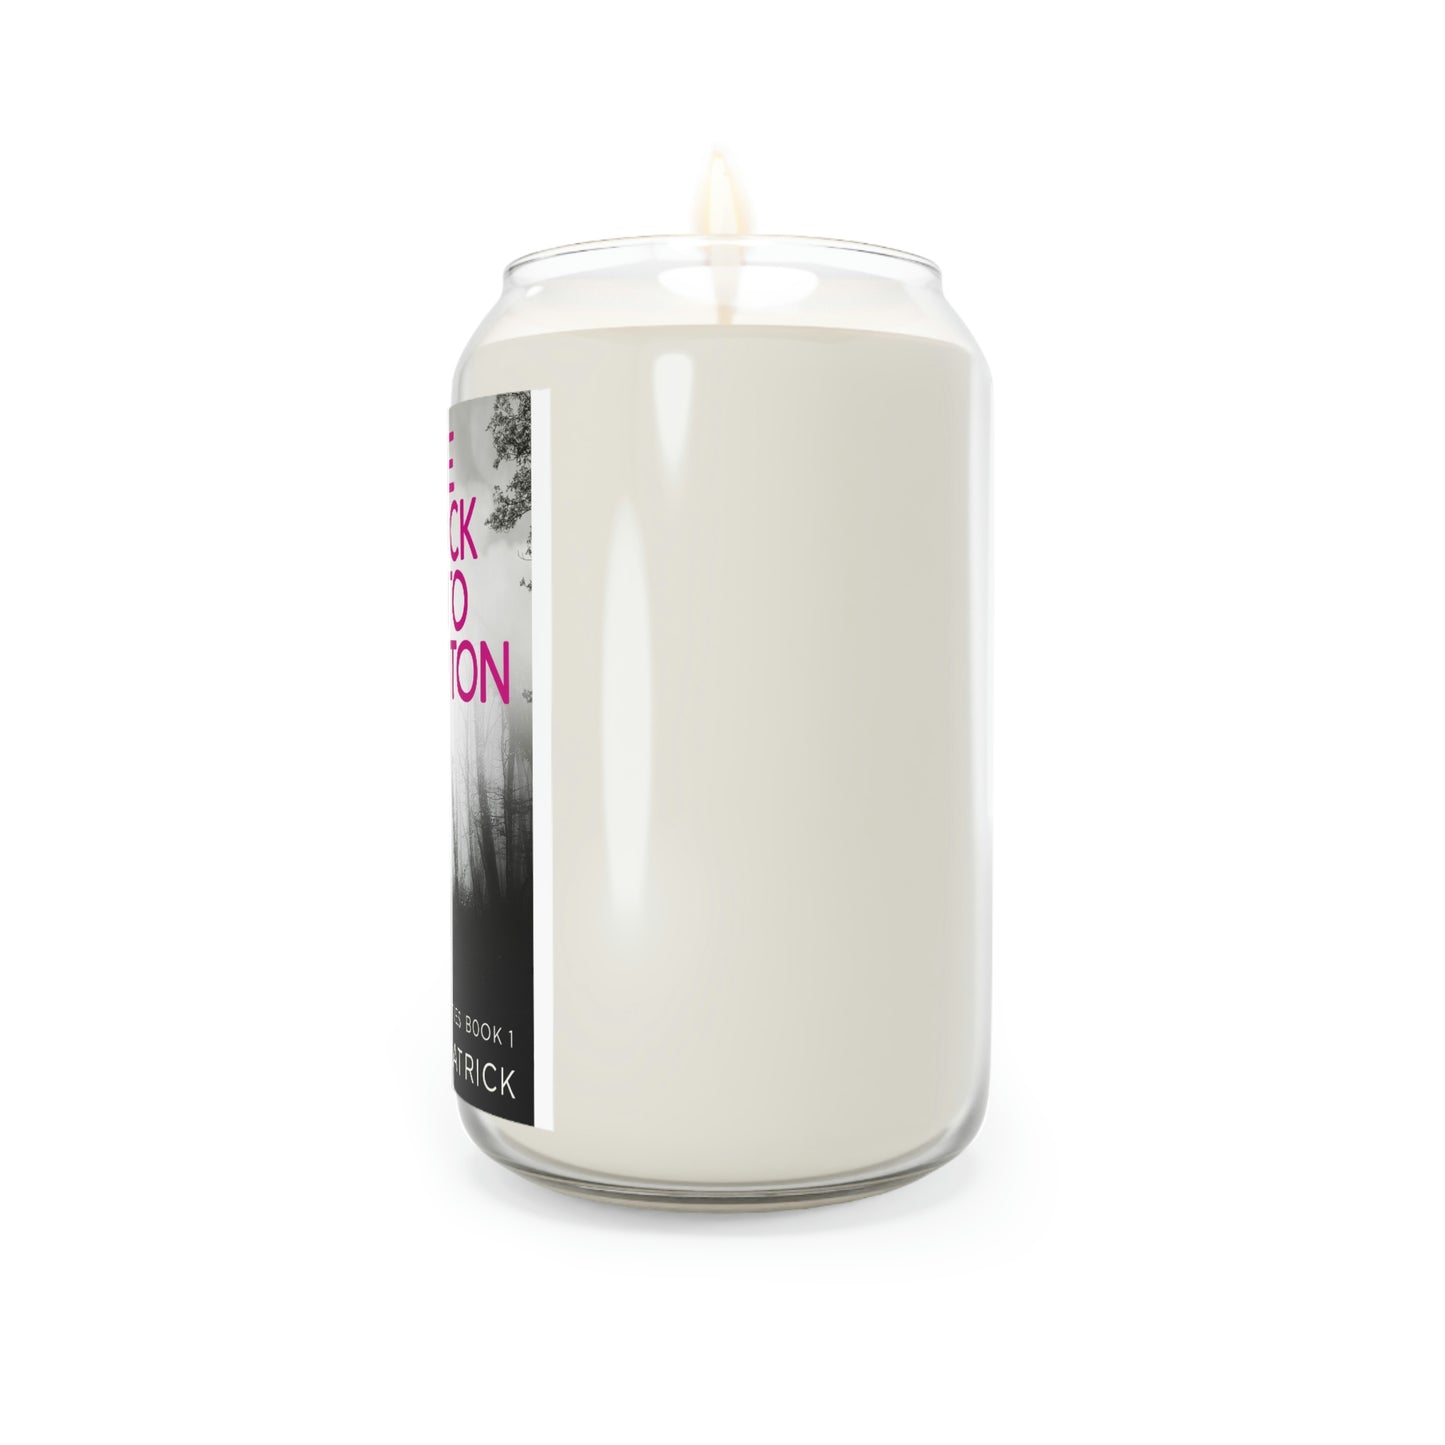 Nine O'Clock Bus To Brompton - Scented Candle